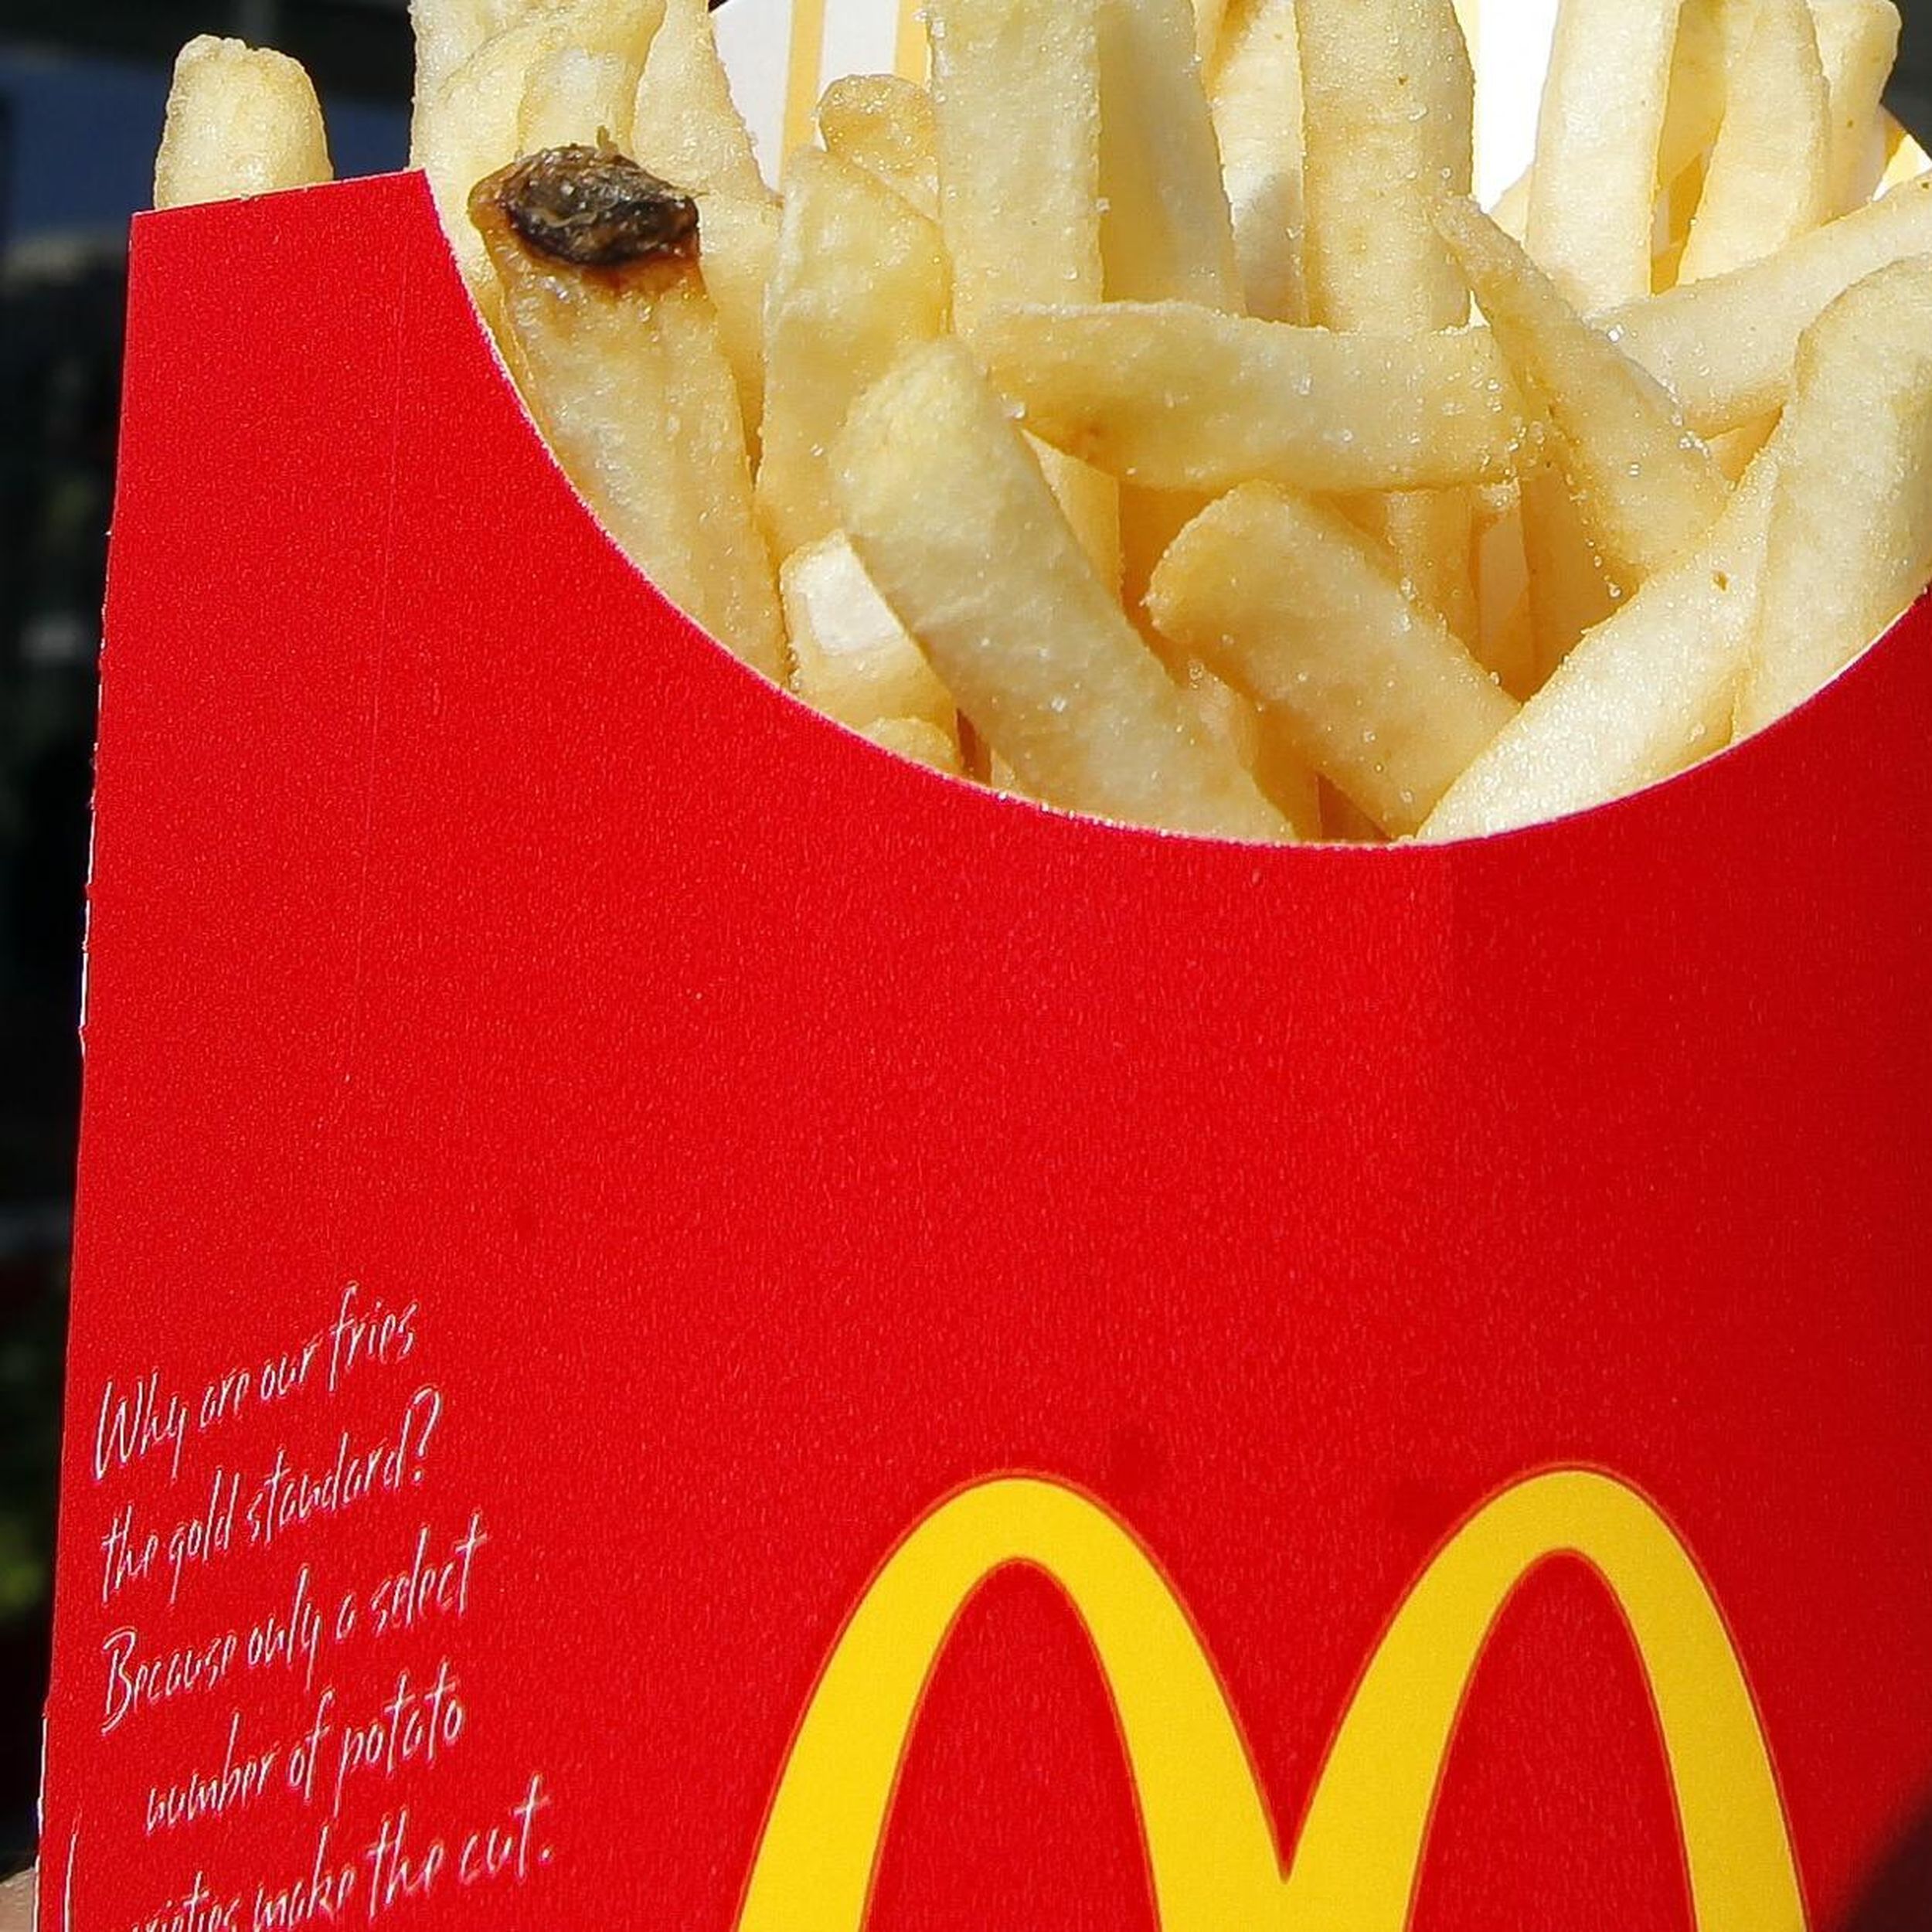 Who remembers making bread french fries with the McDonald's French